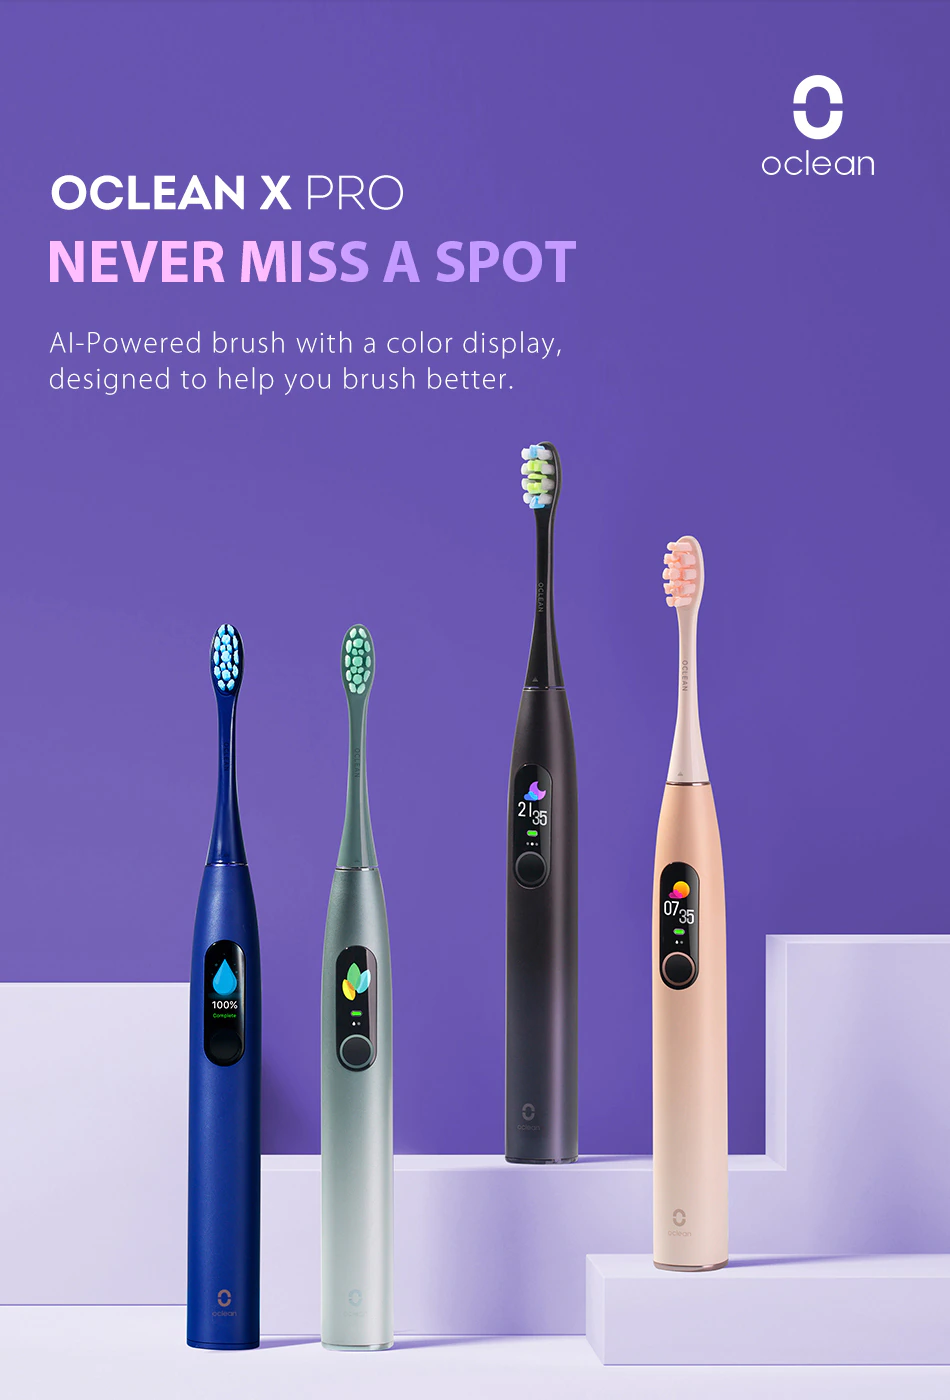  Oclean X Pro Sonic Electric Toothbrush never miss a spot